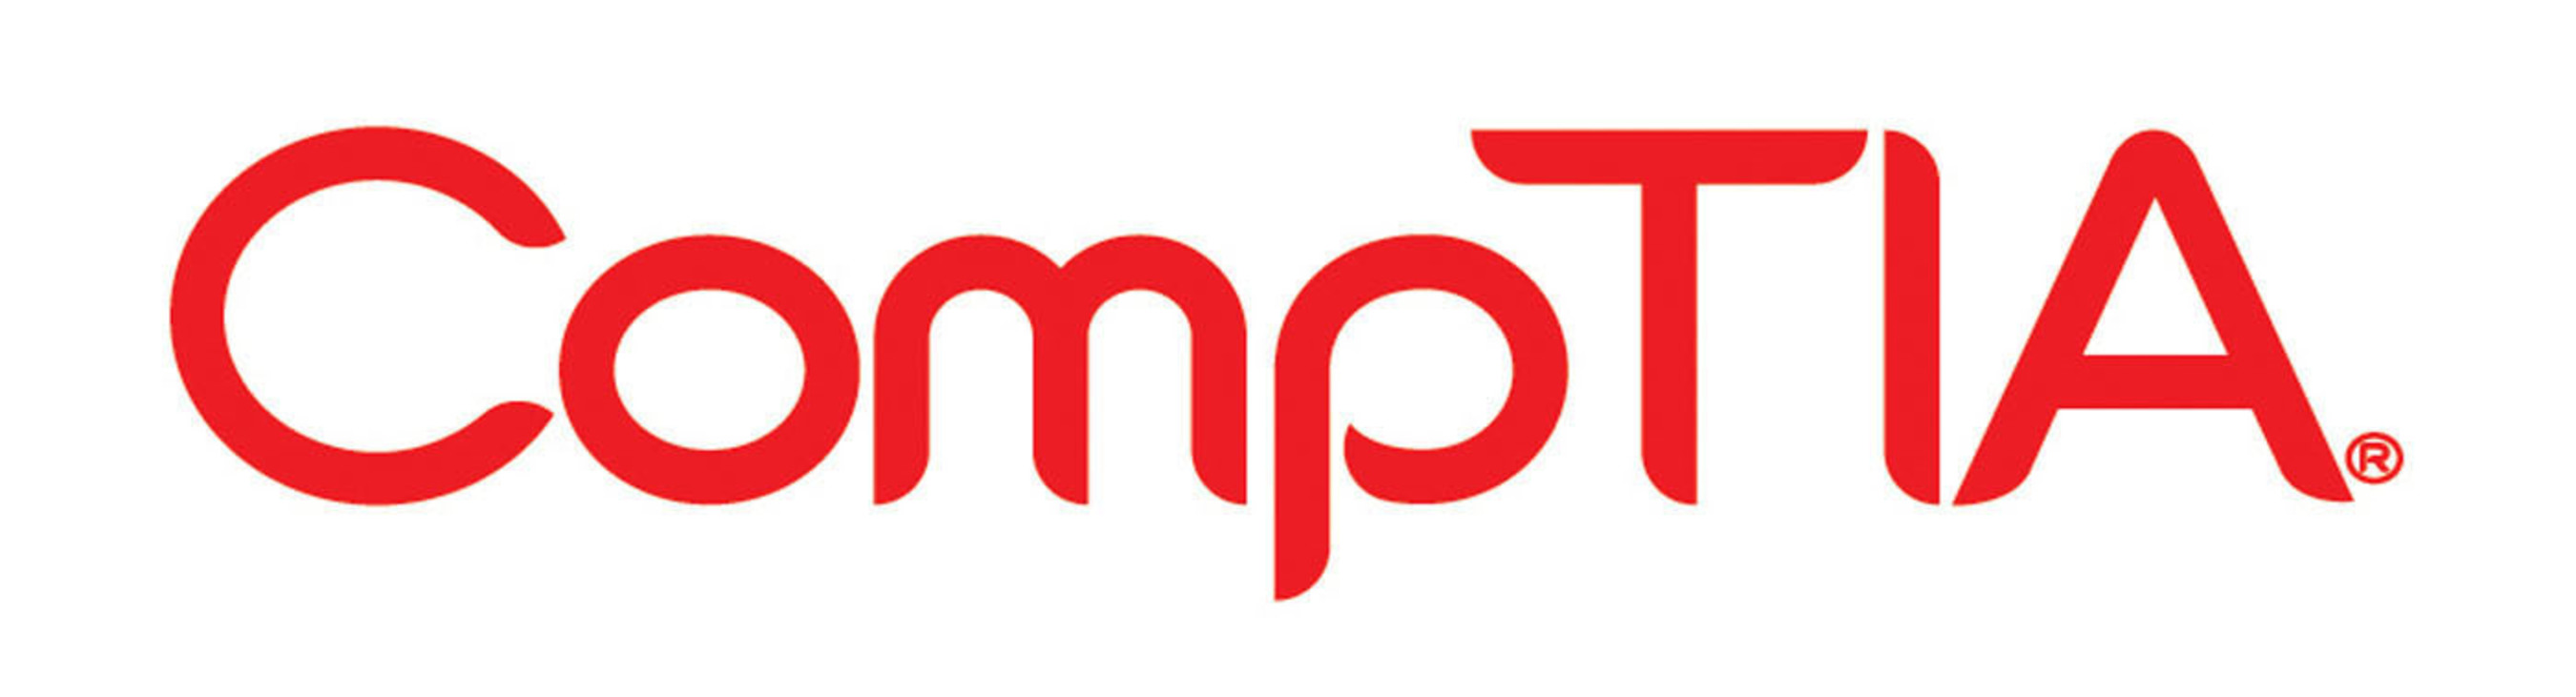 CompTIA is the voice of the world's information technology industry.